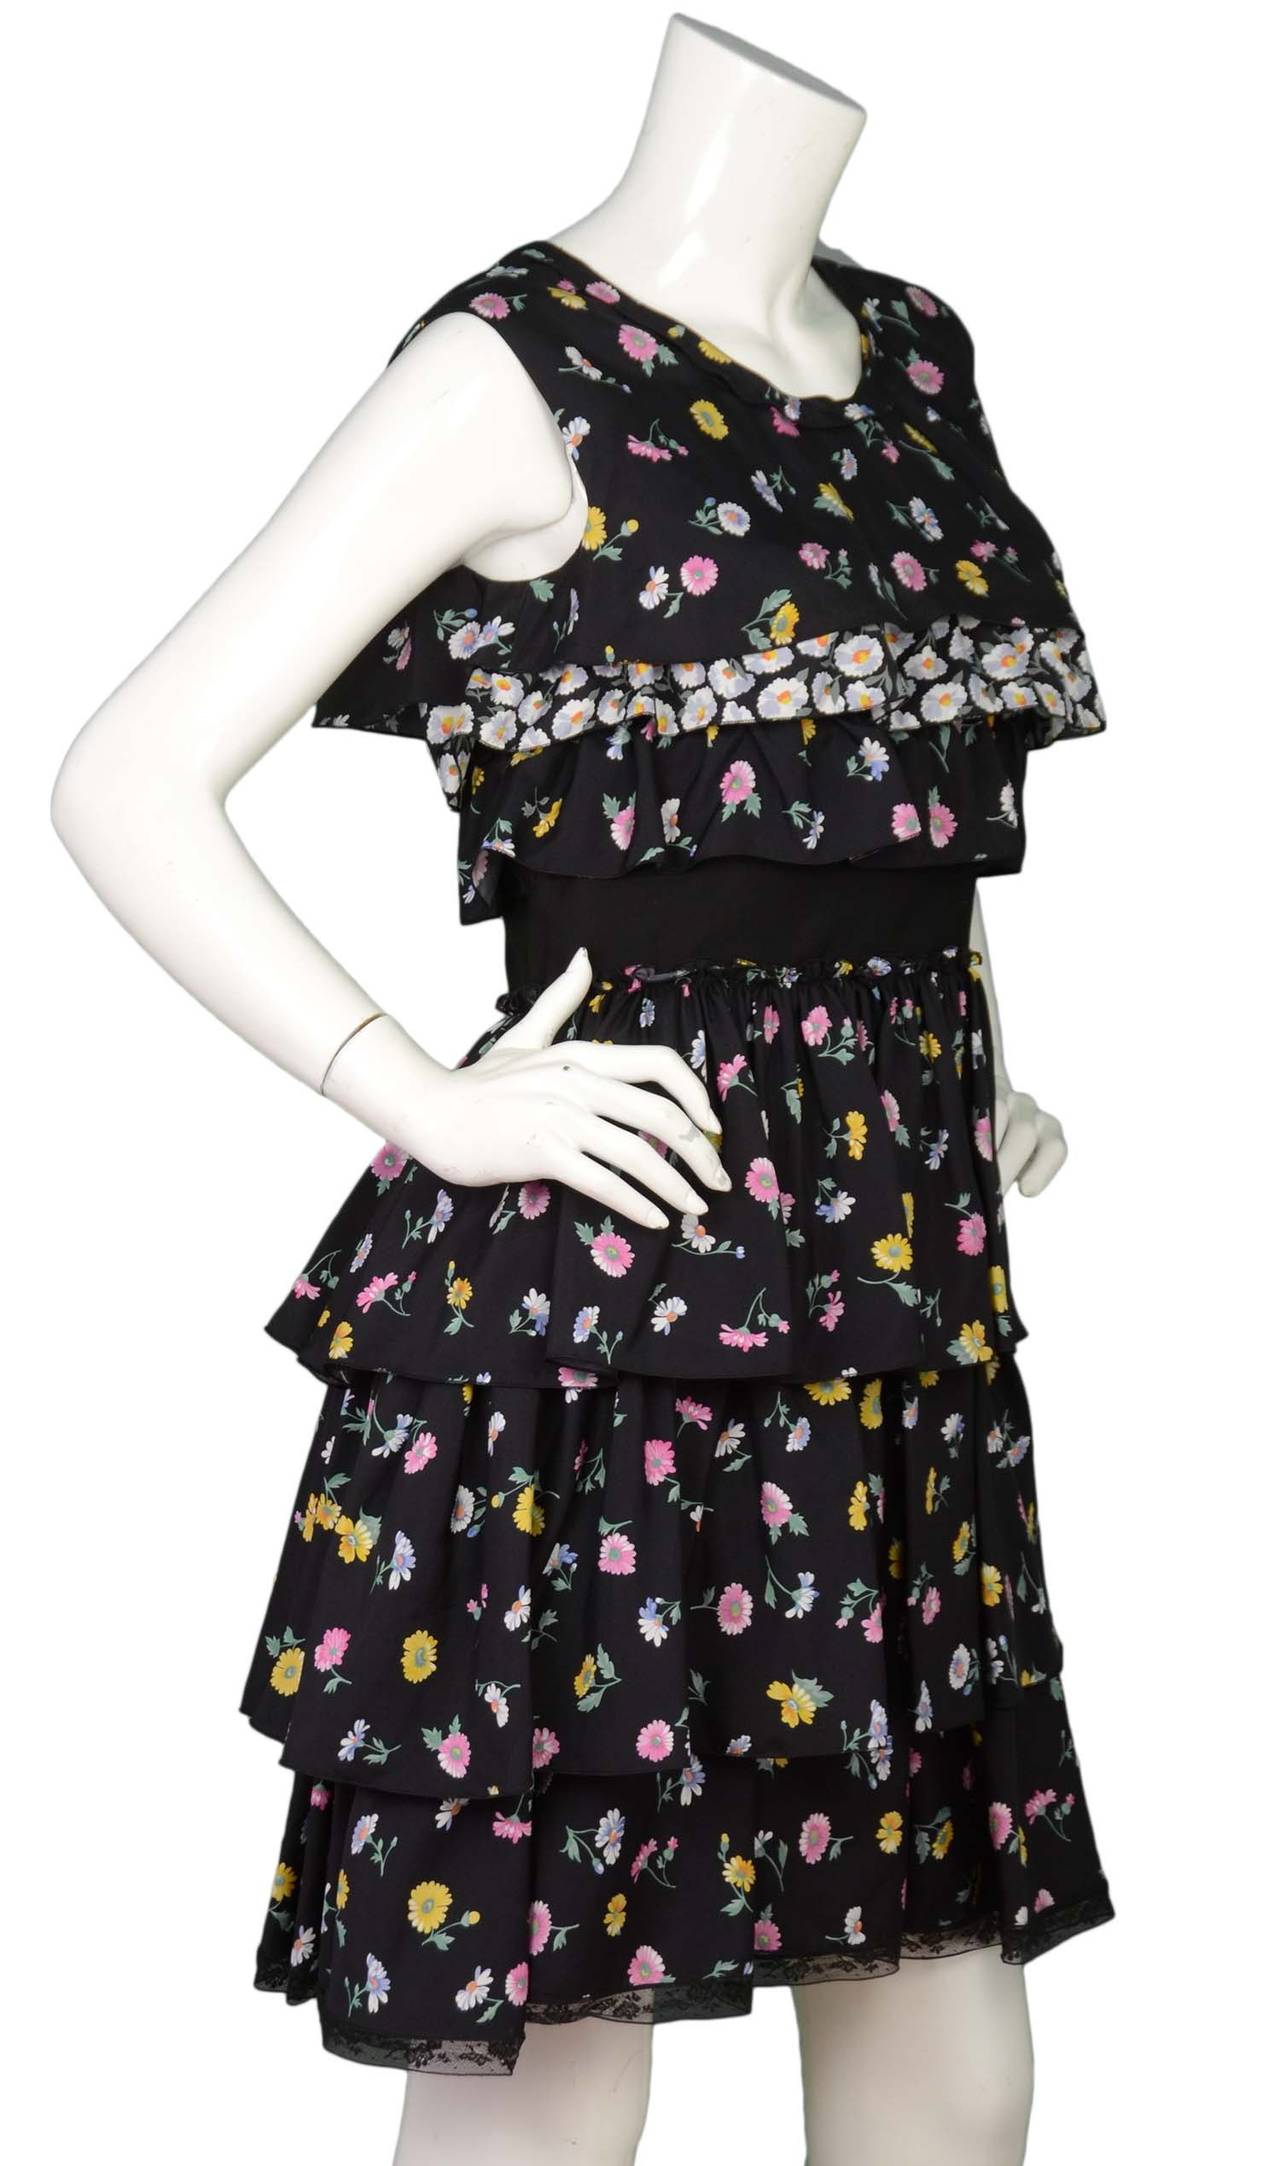 NINA RICCI Navy Silk Sleeveless Ruffle Floral Dress sz. 40
Made in: Slovakia
Color: Navy with floral print
Composition: 100% Silk
Lining: 100% Silk
Closure/opening: zipper in the back
Overall Condition: Excellent pre-owned condition
Marked